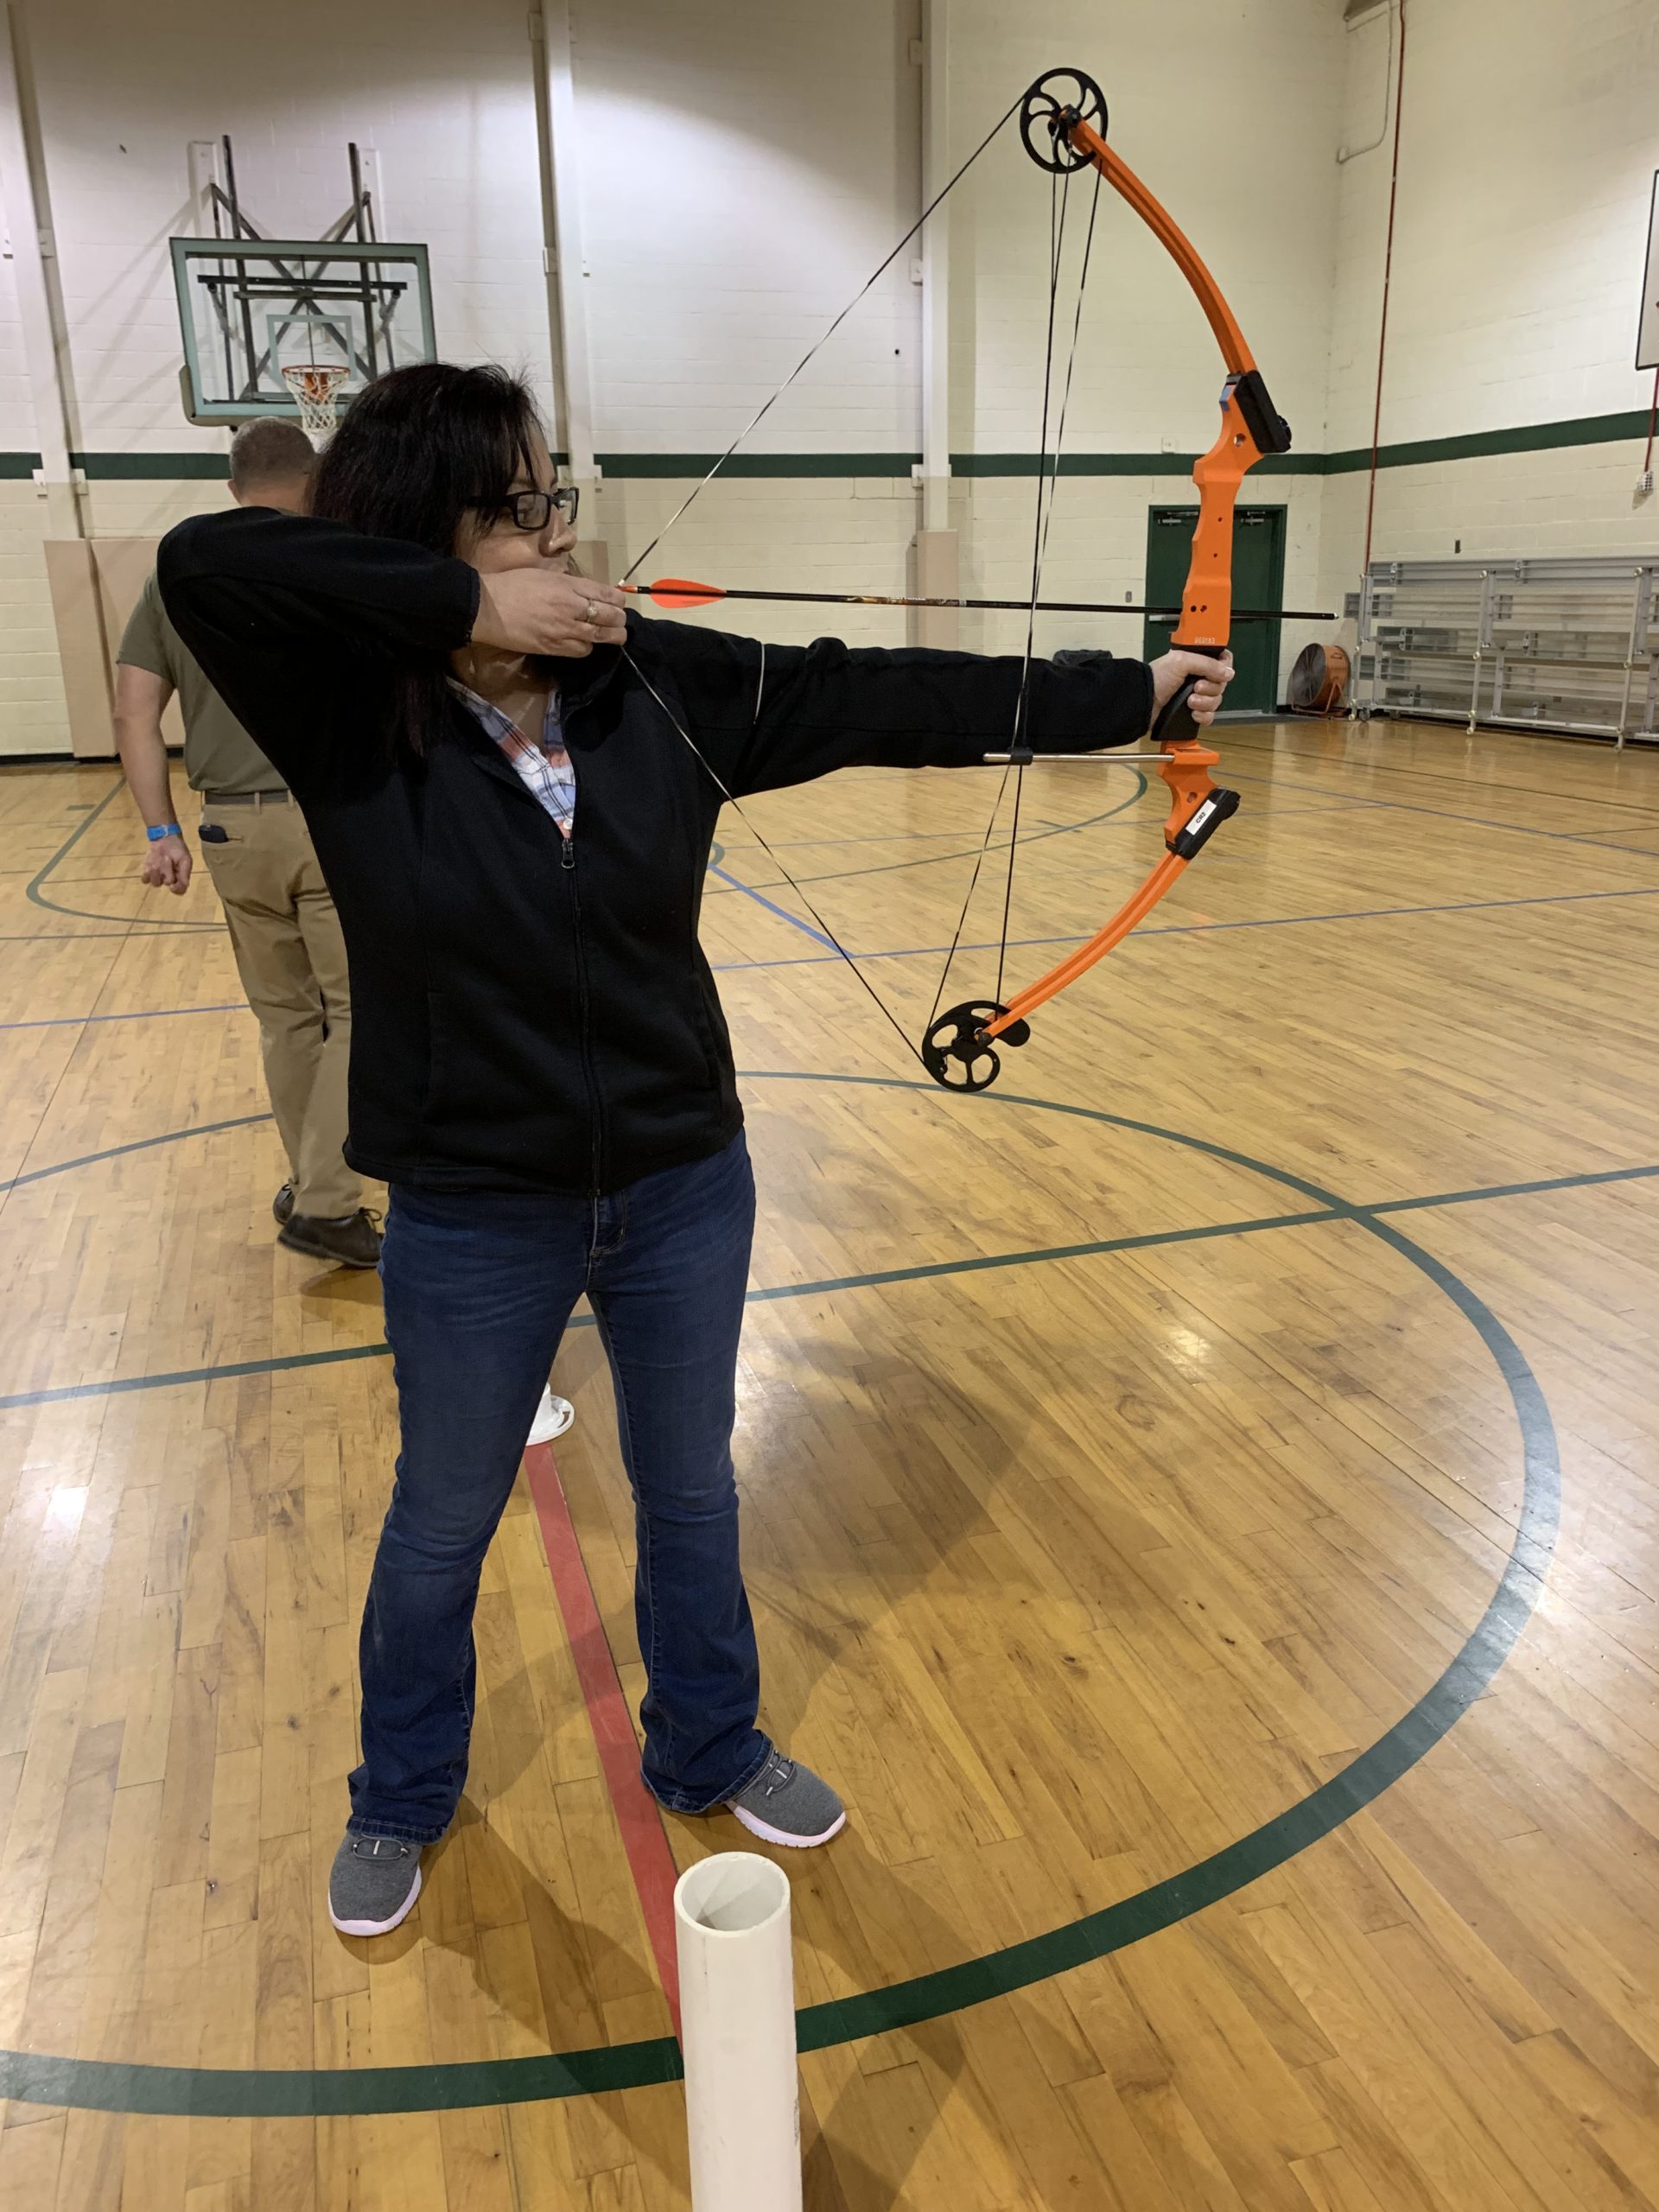 A lady Visually Impaired Program participant shoots an error in a gymnasium 